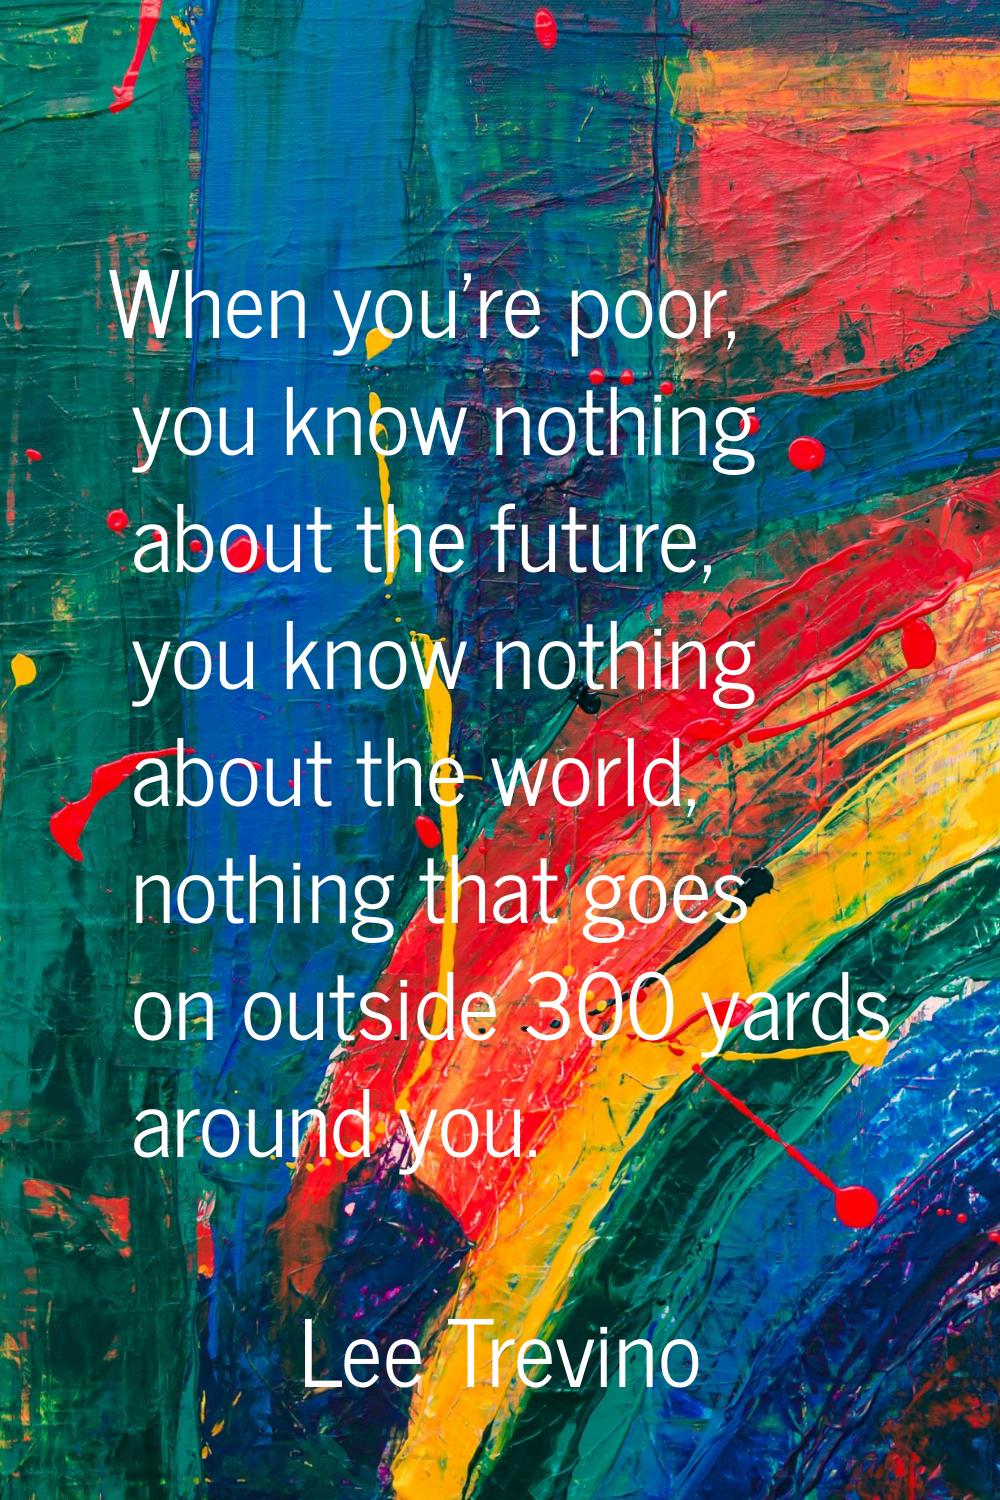 When you're poor, you know nothing about the future, you know nothing about the world, nothing that